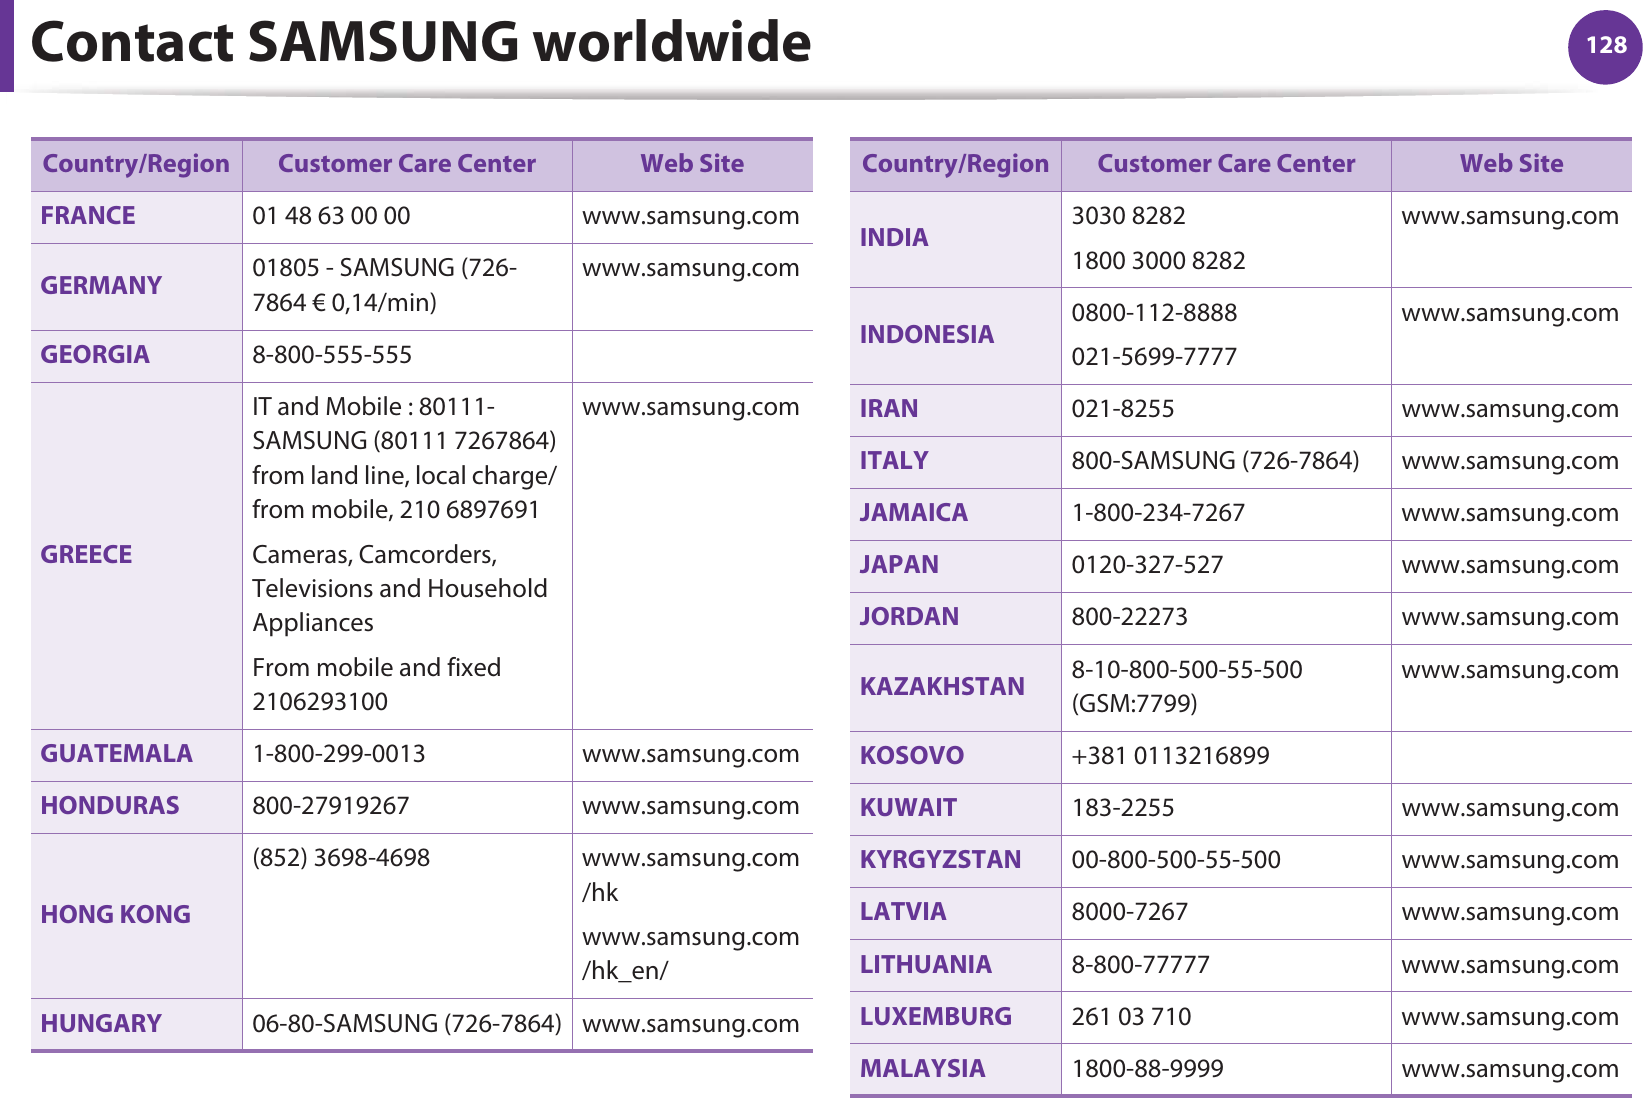 Contact SAMSUNG worldwide 128FRANCE 01 48 63 00 00 www.samsung.comGERMANY 01805 - SAMSUNG (726-7864 € 0,14/min)www.samsung.comGEORGIA 8-800-555-555GREECEIT and Mobile : 80111-SAMSUNG (80111 7267864) from land line, local charge/ from mobile, 210 6897691 Cameras, Camcorders, Televisions and Household AppliancesFrom mobile and fixed 2106293100www.samsung.comGUATEMALA 1-800-299-0013 www.samsung.comHONDURAS 800-27919267 www.samsung.comHONG KONG(852) 3698-4698 www.samsung.com/hkwww.samsung.com/hk_en/HUNGARY 06-80-SAMSUNG (726-7864) www.samsung.comCountry/Region Customer Care Center  Web SiteINDIA 3030 82821800 3000 8282 www.samsung.comINDONESIA 0800-112-8888021-5699-7777www.samsung.comIRAN 021-8255 www.samsung.comITALY 800-SAMSUNG (726-7864) www.samsung.comJAMAICA 1-800-234-7267 www.samsung.comJAPAN 0120-327-527 www.samsung.comJORDAN 800-22273 www.samsung.comKAZAKHSTAN 8-10-800-500-55-500 (GSM:7799)www.samsung.comKOSOVO +381 0113216899KUWAIT 183-2255 www.samsung.comKYRGYZSTAN 00-800-500-55-500 www.samsung.comLATVIA 8000-7267 www.samsung.comLITHUANIA 8-800-77777 www.samsung.comLUXEMBURG 261 03 710 www.samsung.comMALAYSIA 1800-88-9999 www.samsung.comCountry/Region Customer Care Center  Web Site